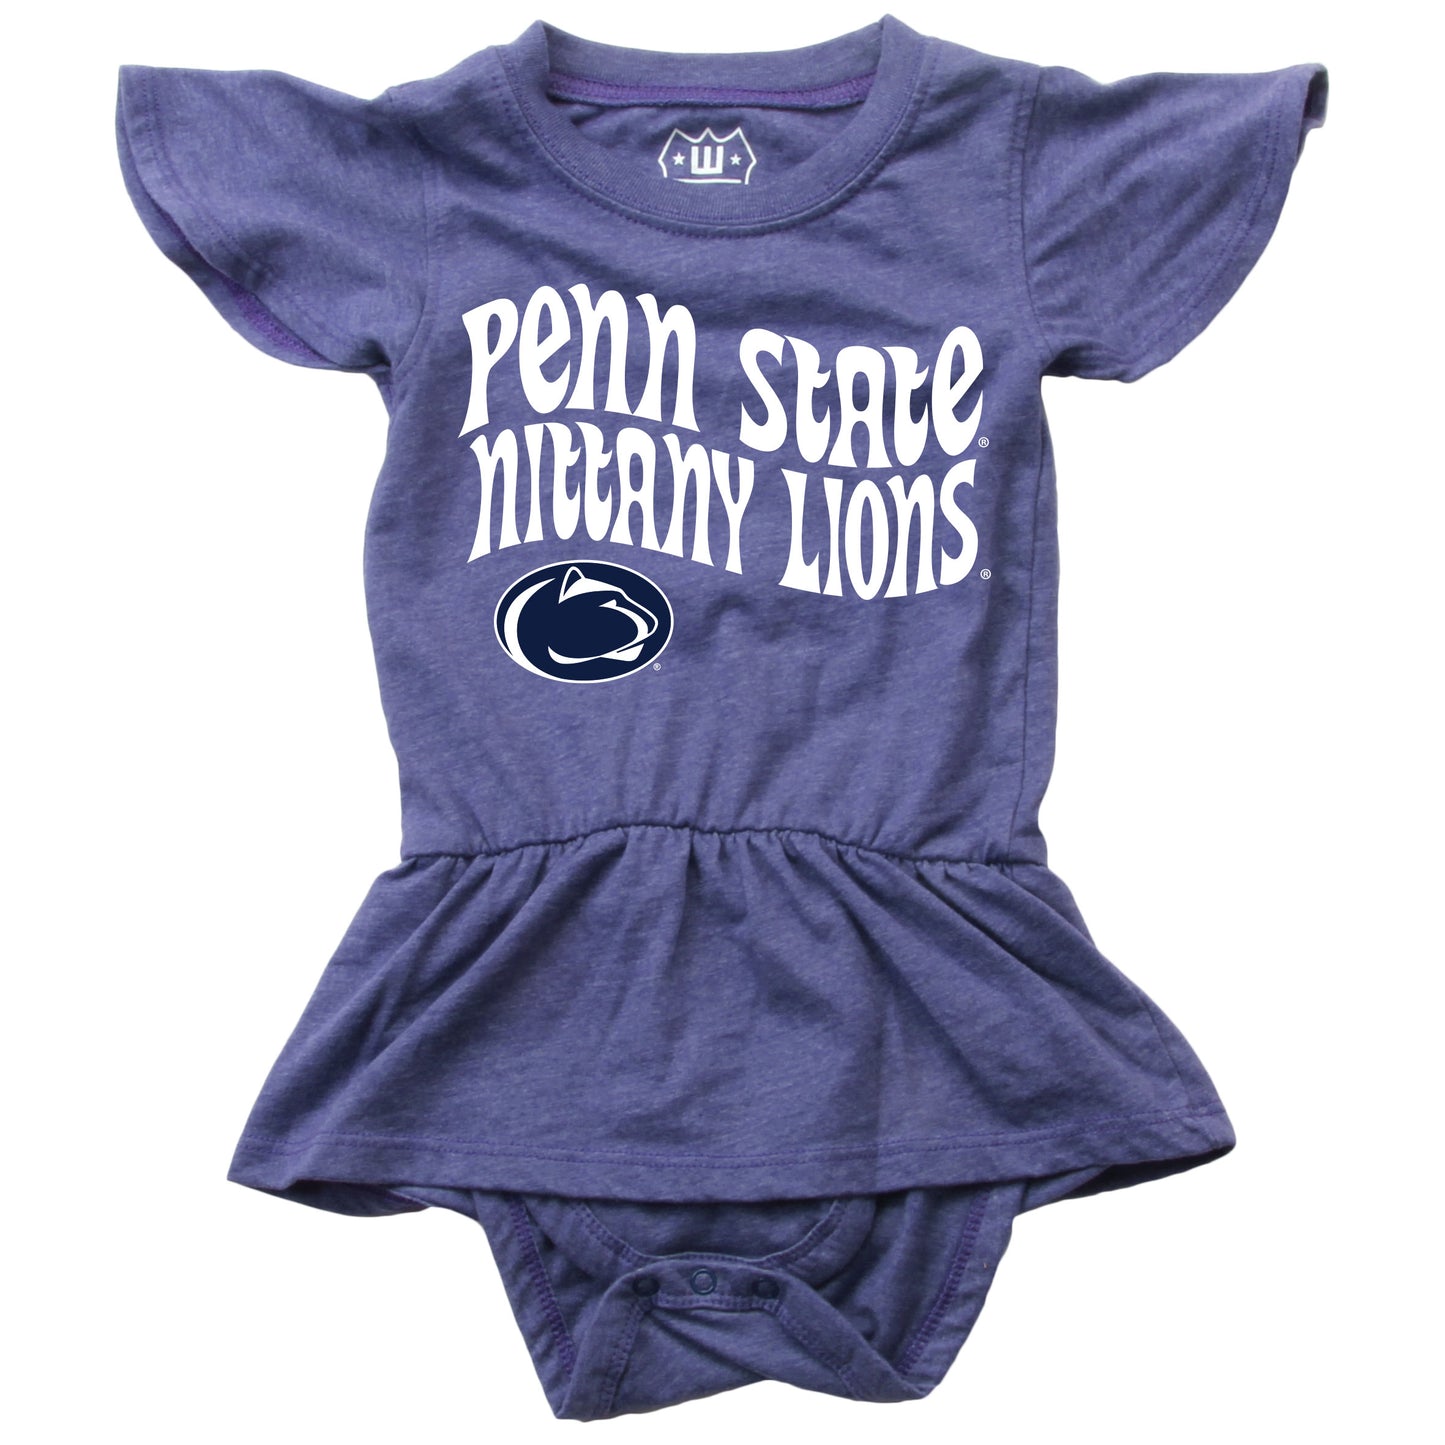 Penn State Nittany Lions Wes and Willy Baby Girls College Team One Piece Hopper Skirt